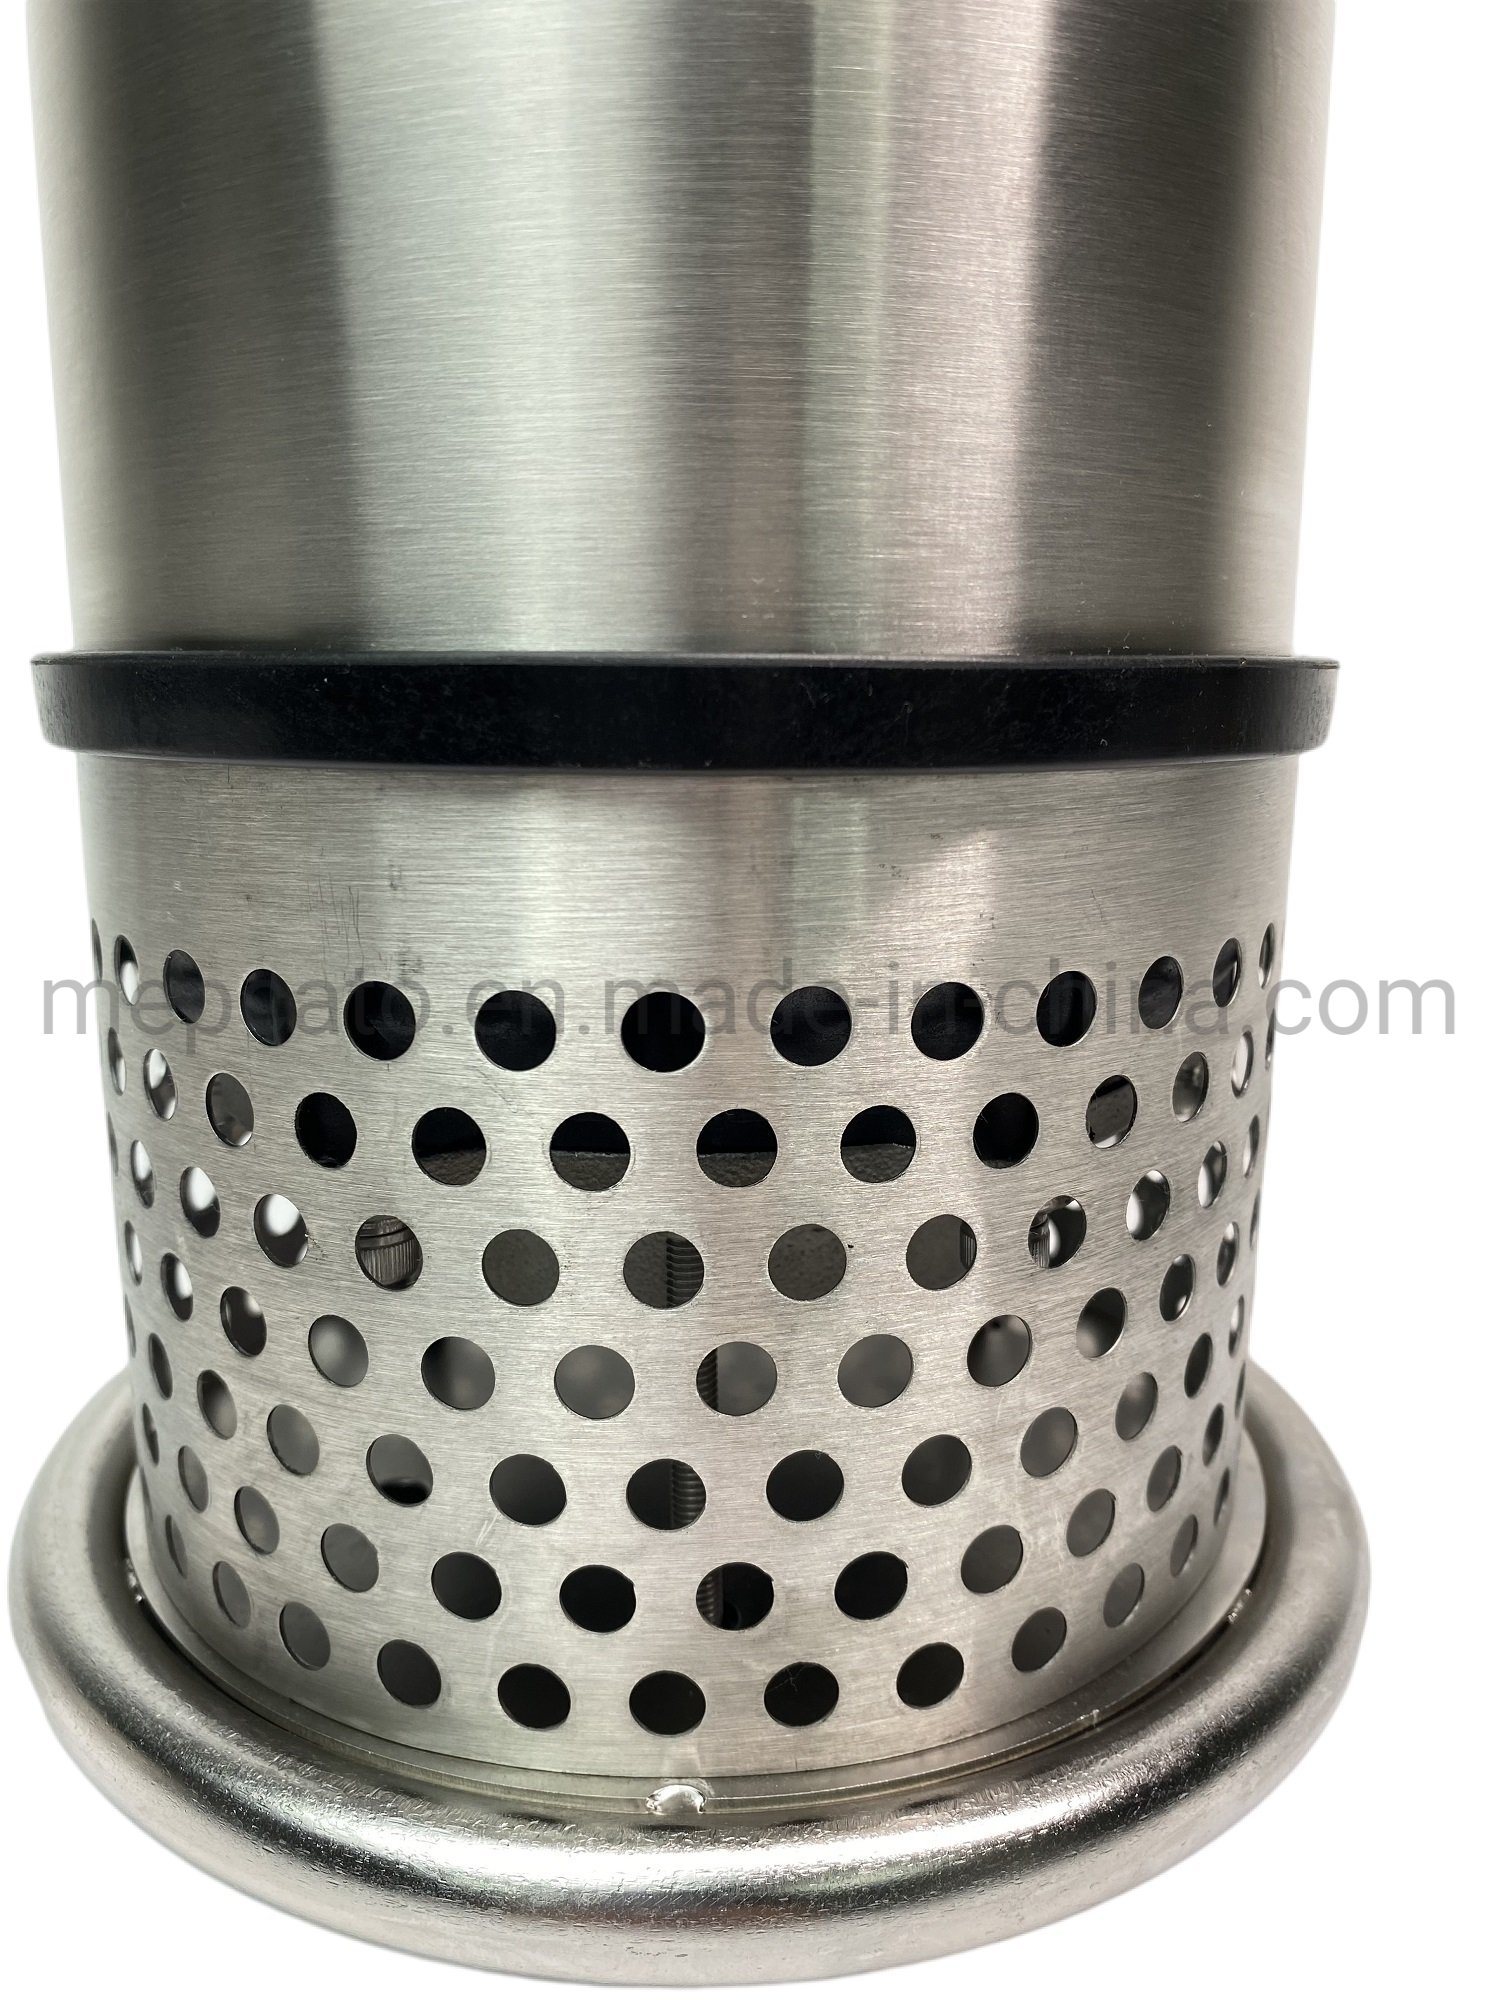 Agriculture Fishpond Fish Farm Aquarium Agriculture Farming Axial Flow Stainless Steel Centrifugal Electric Sea Water Circulation Submersible Pump